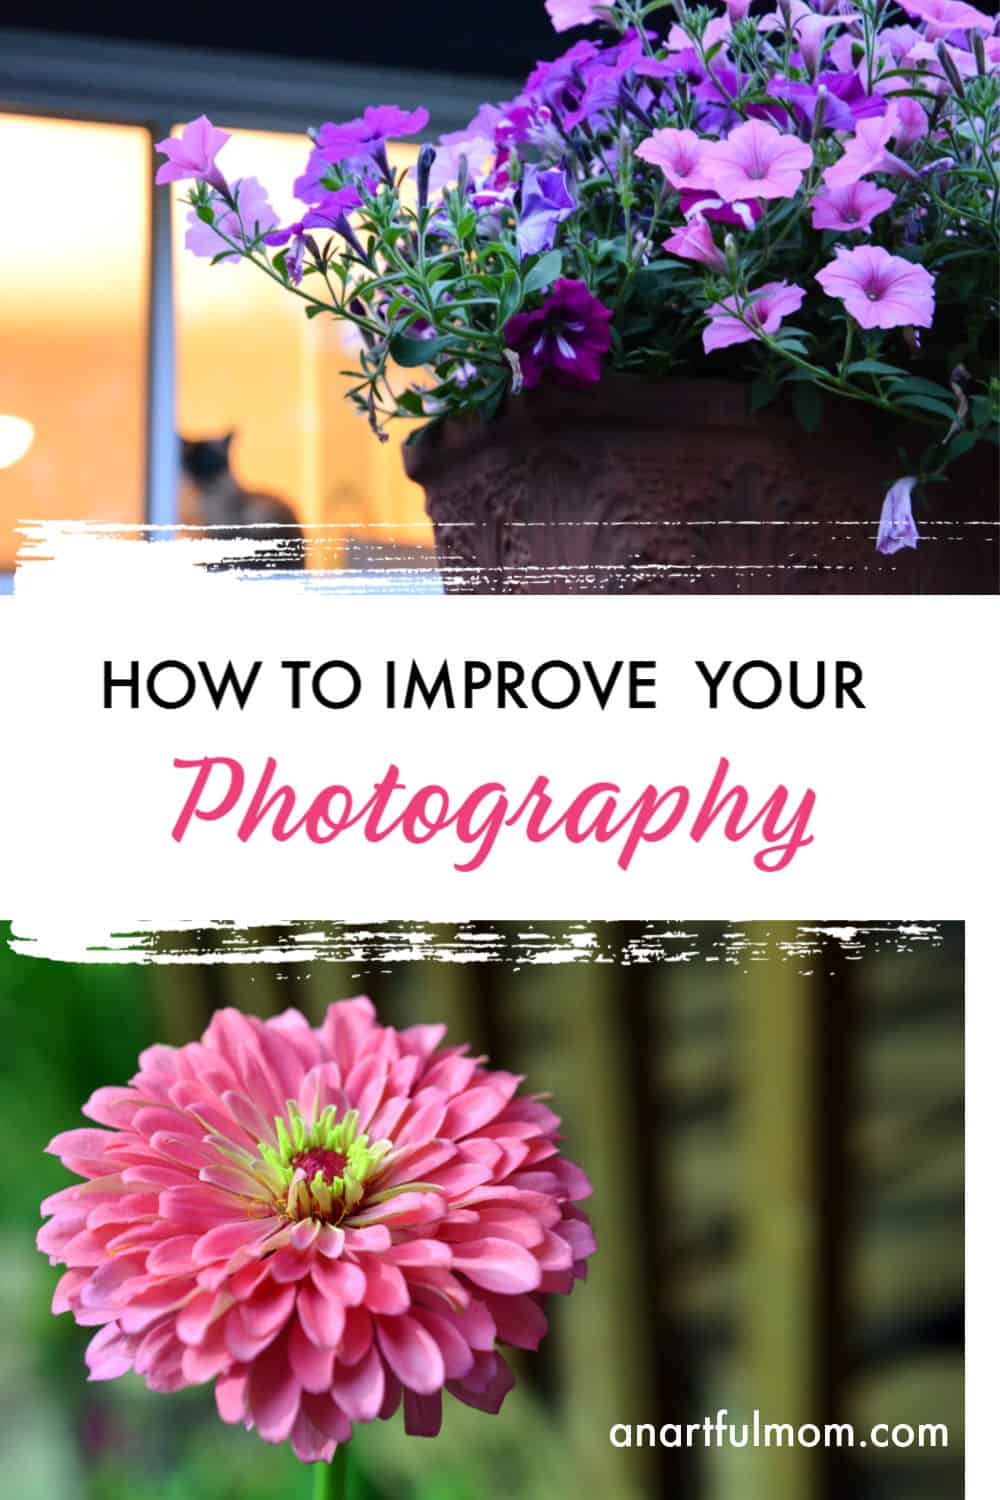 Photography tips for better photos